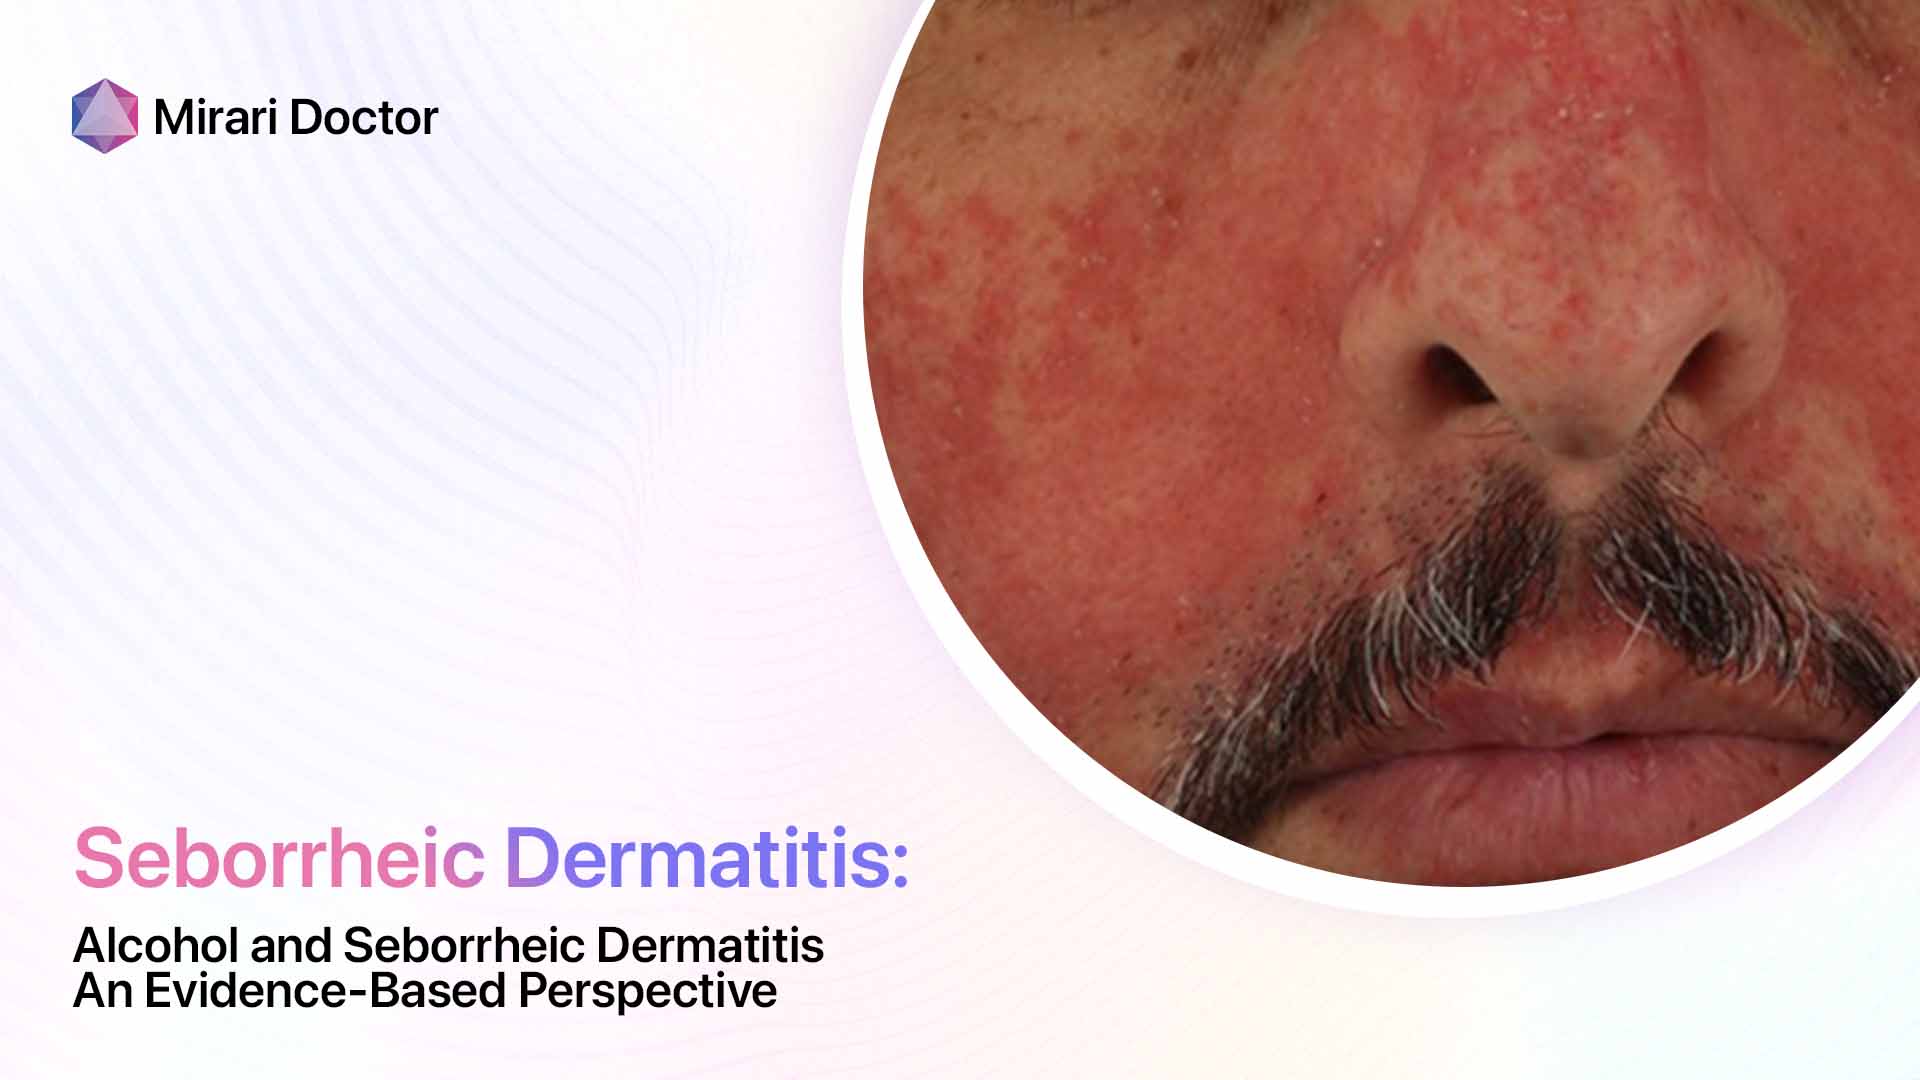 Featured image for “Alcohol and Seborrheic Dermatitis: An Evidence-Based Perspective”